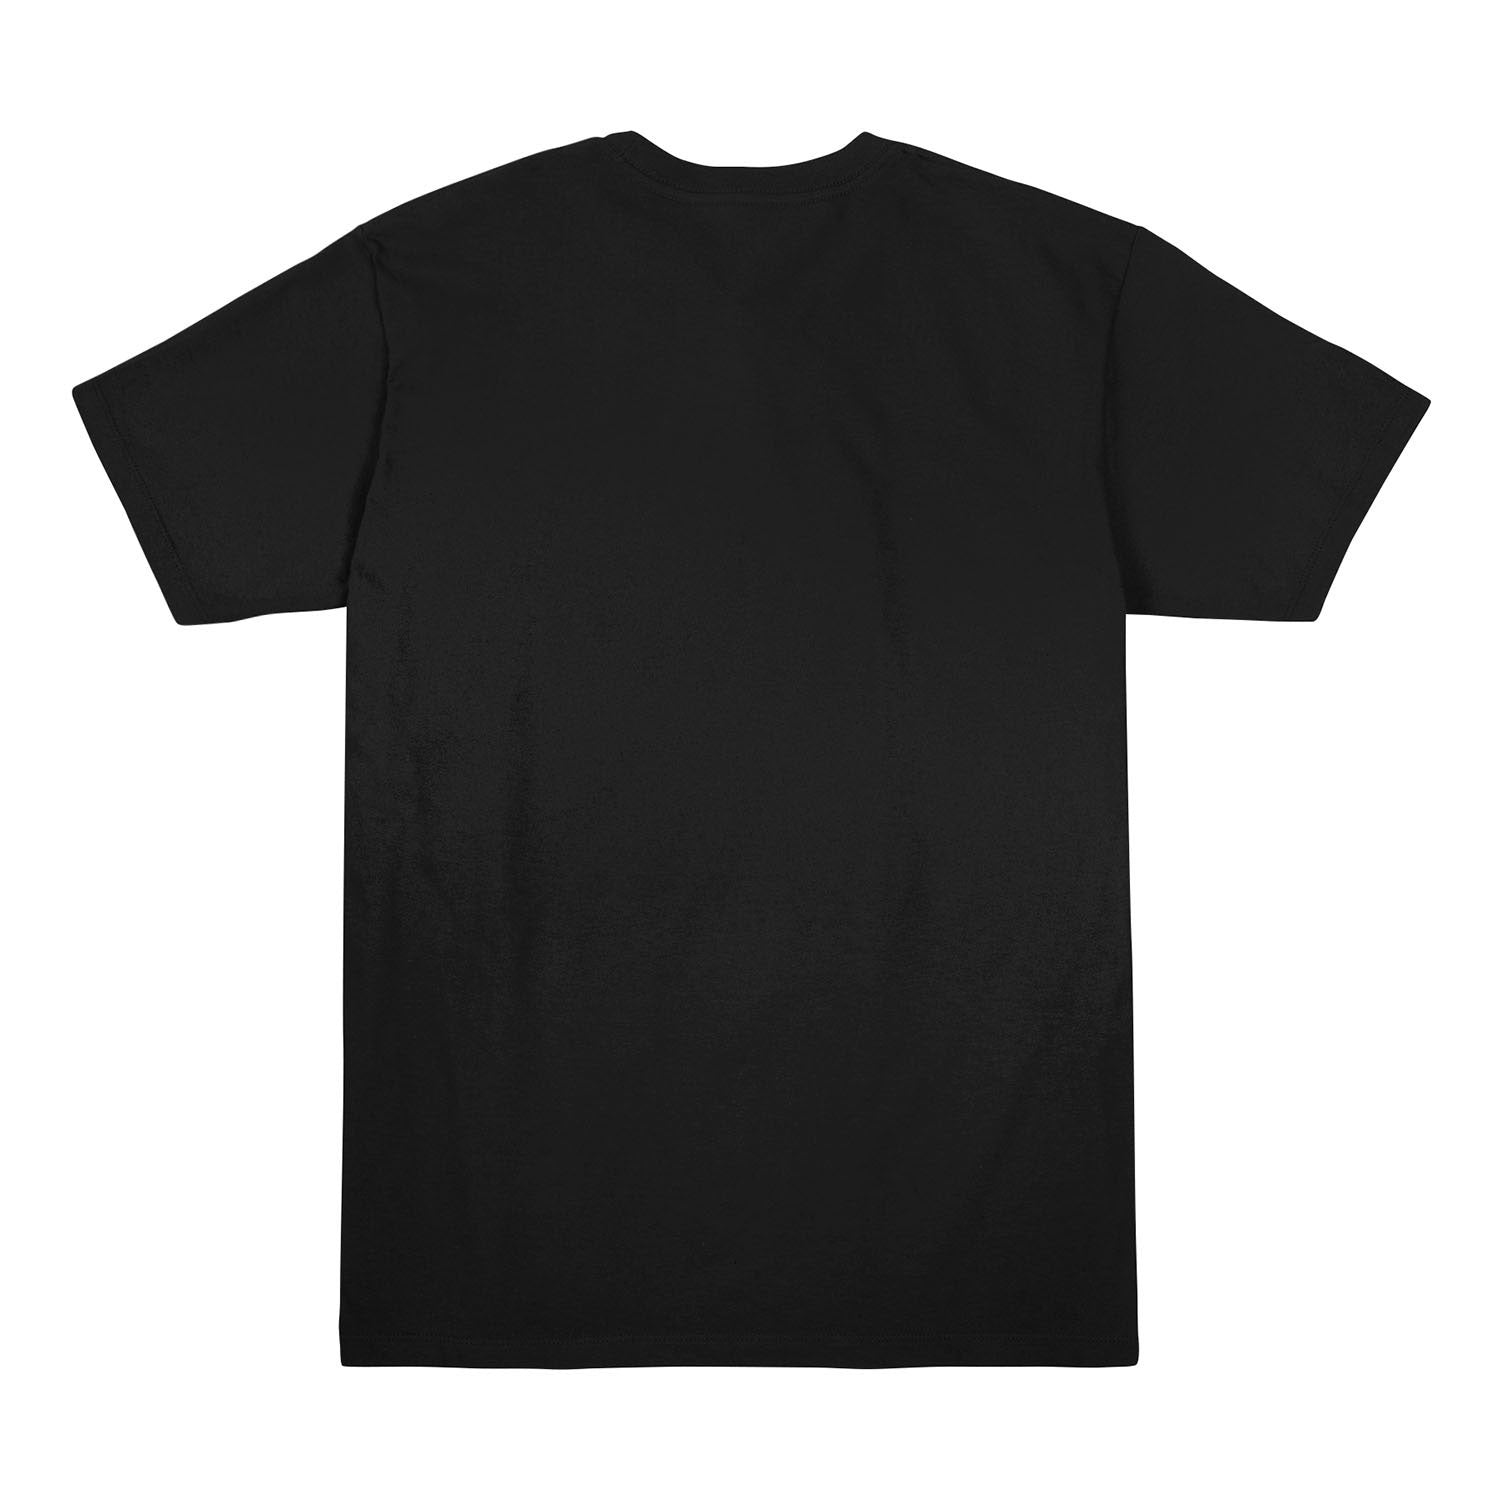 Call of Duty: Warzone Buy Me Back Black T-Shirt - Back view